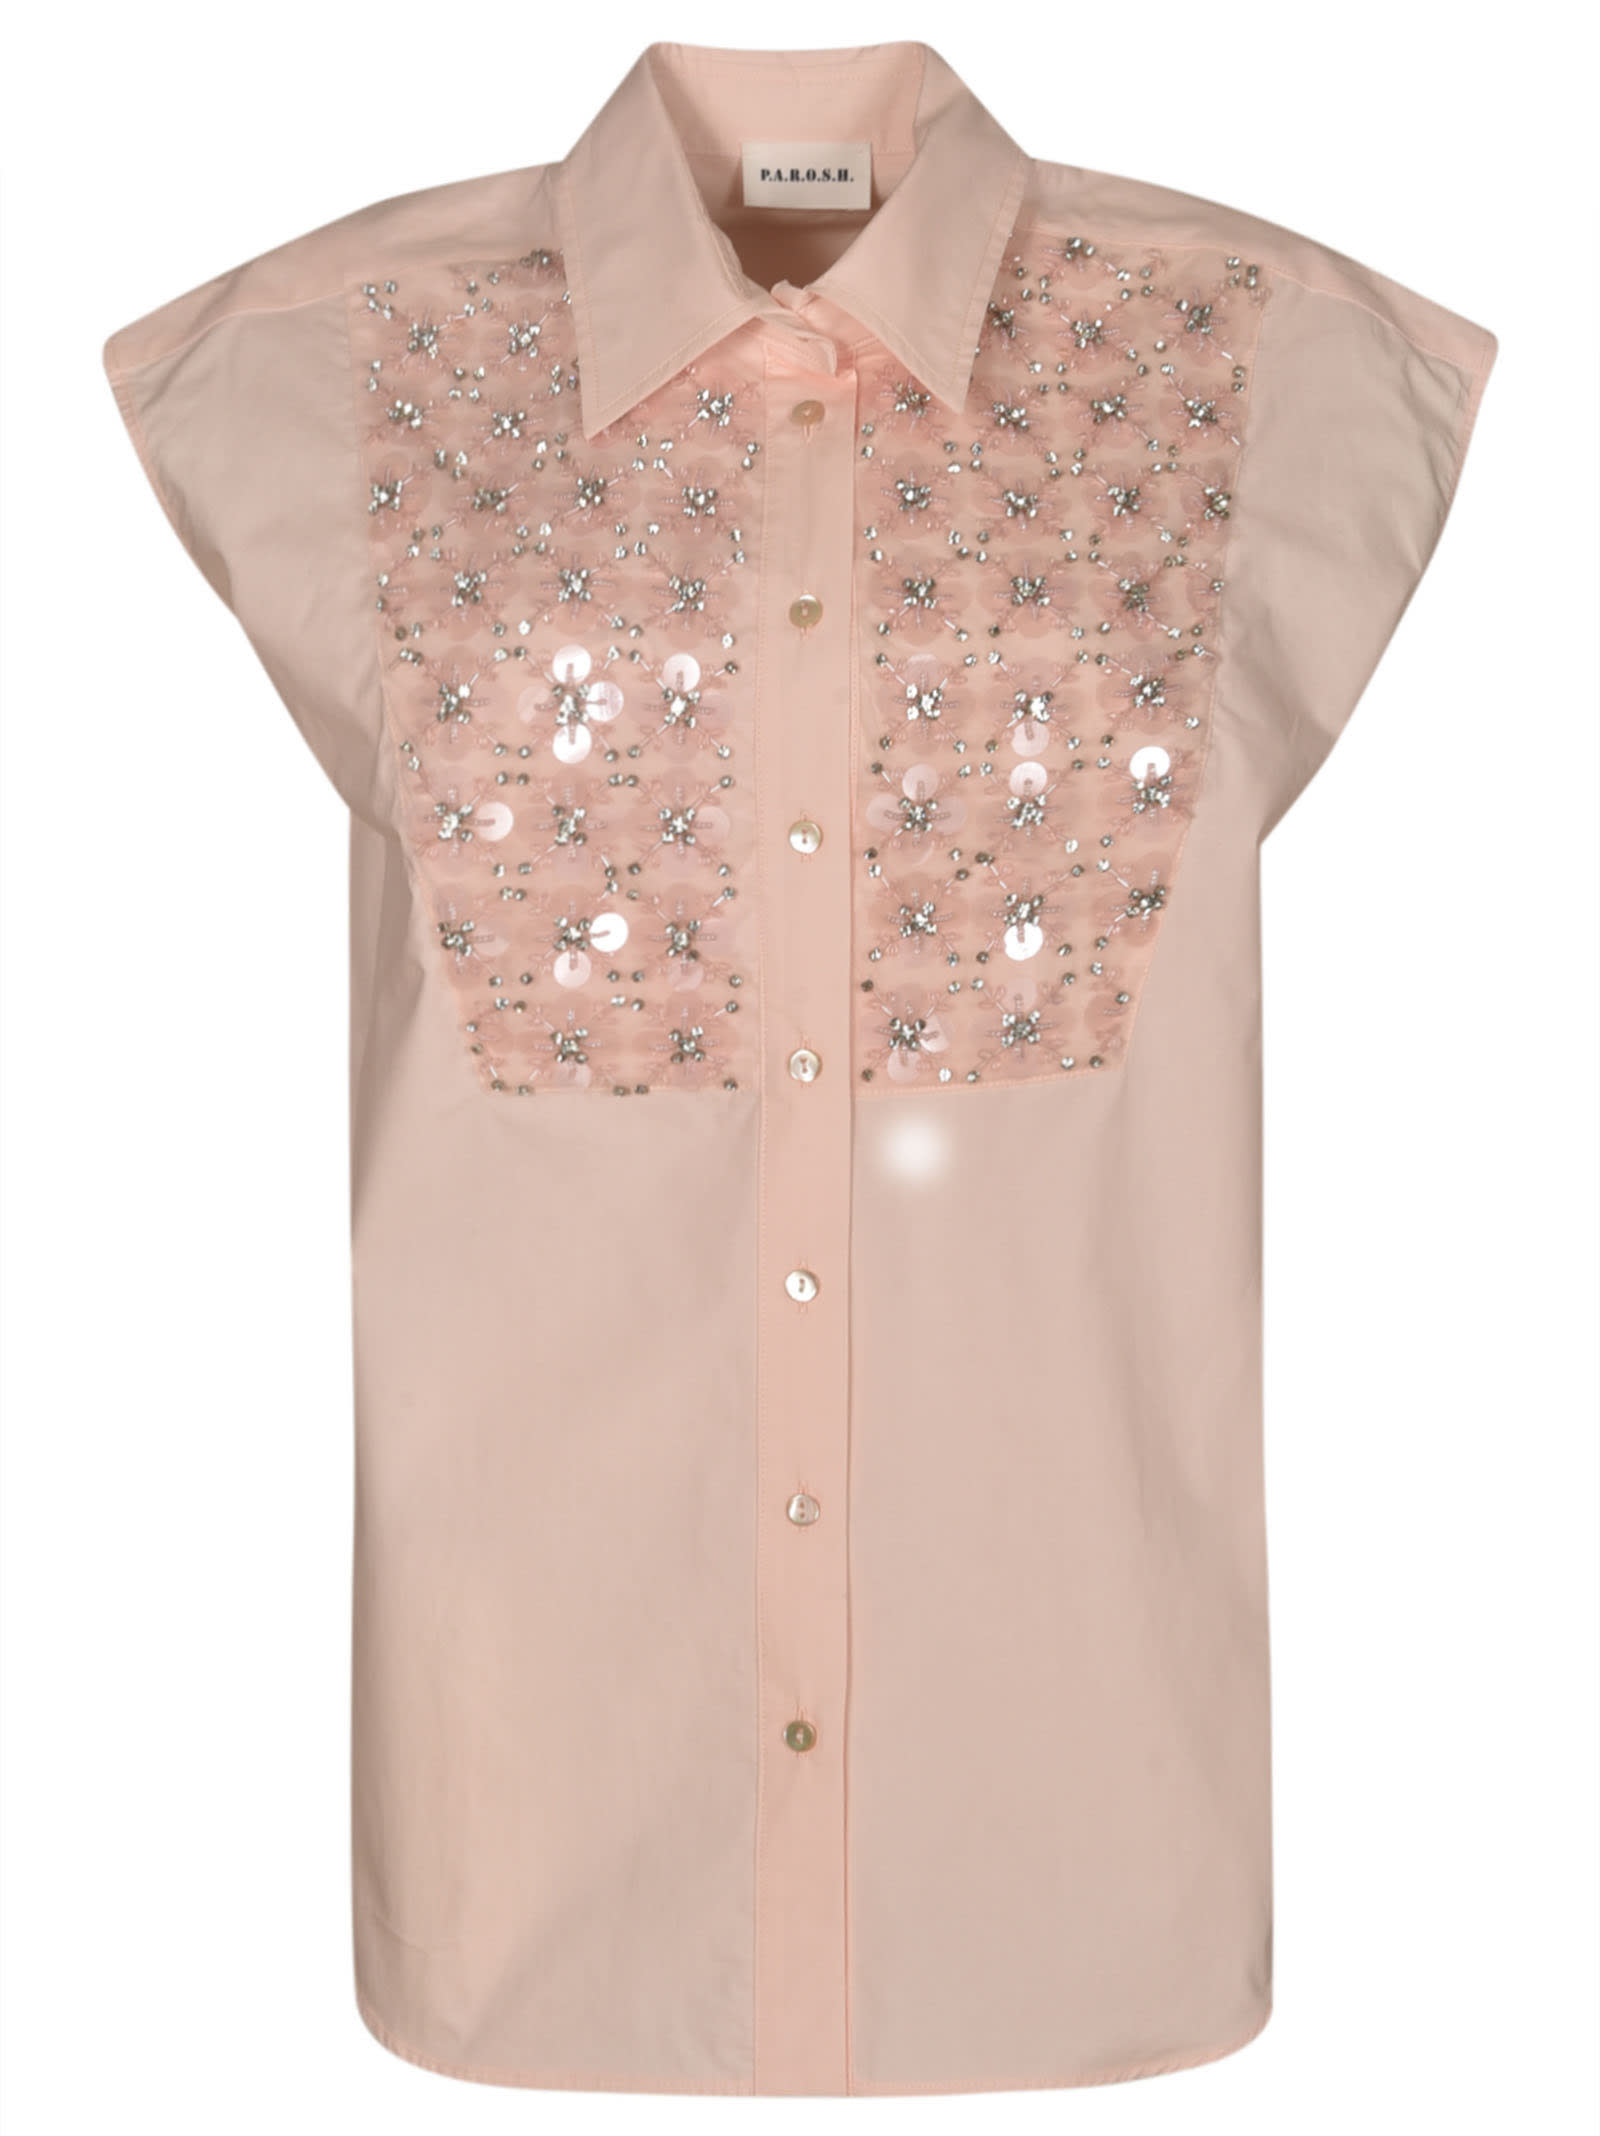 P.a.r.o.s.h Embellished Sleeveless Shirt In Pink